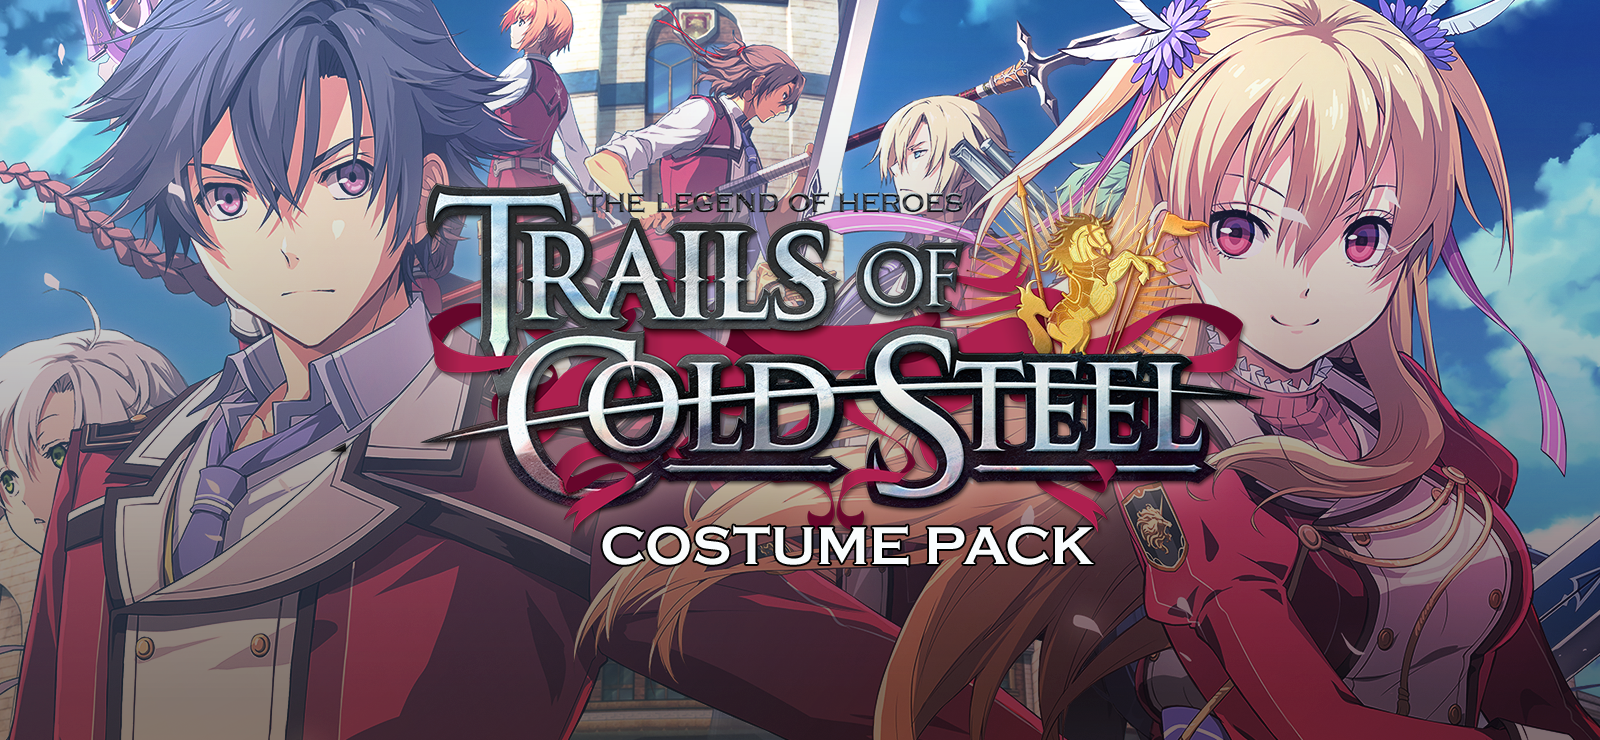 The Legend Of Heroes: Trails Of Cold Steel - Costume Pack